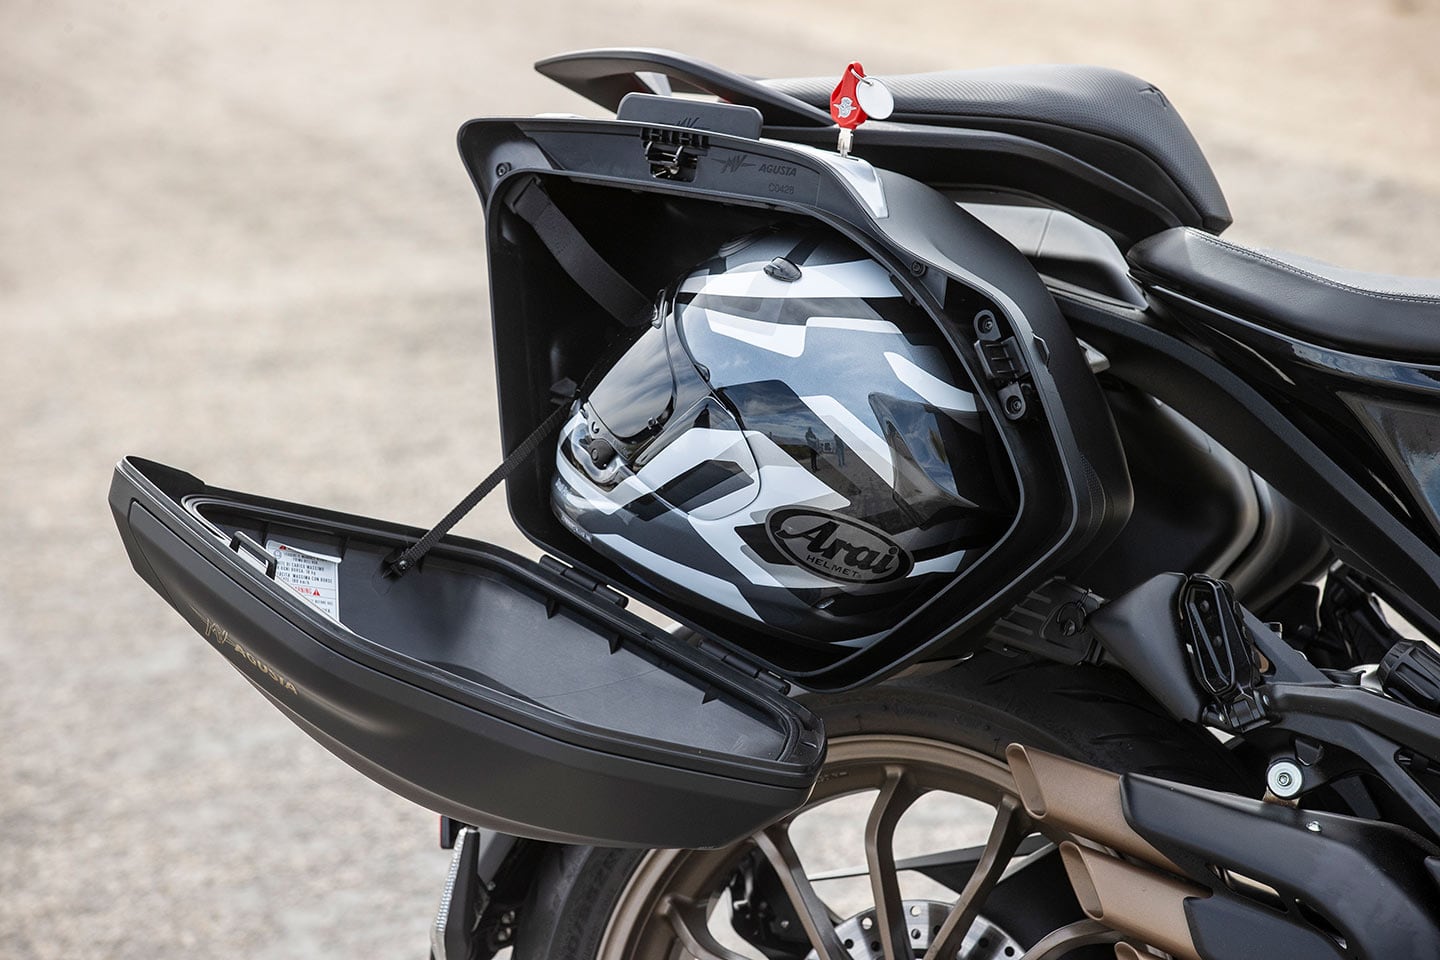 The 34-liter side bags fit a full-face helmet and are quite impressive in terms of their storage ability. Fit and finish is a touch less impressive.